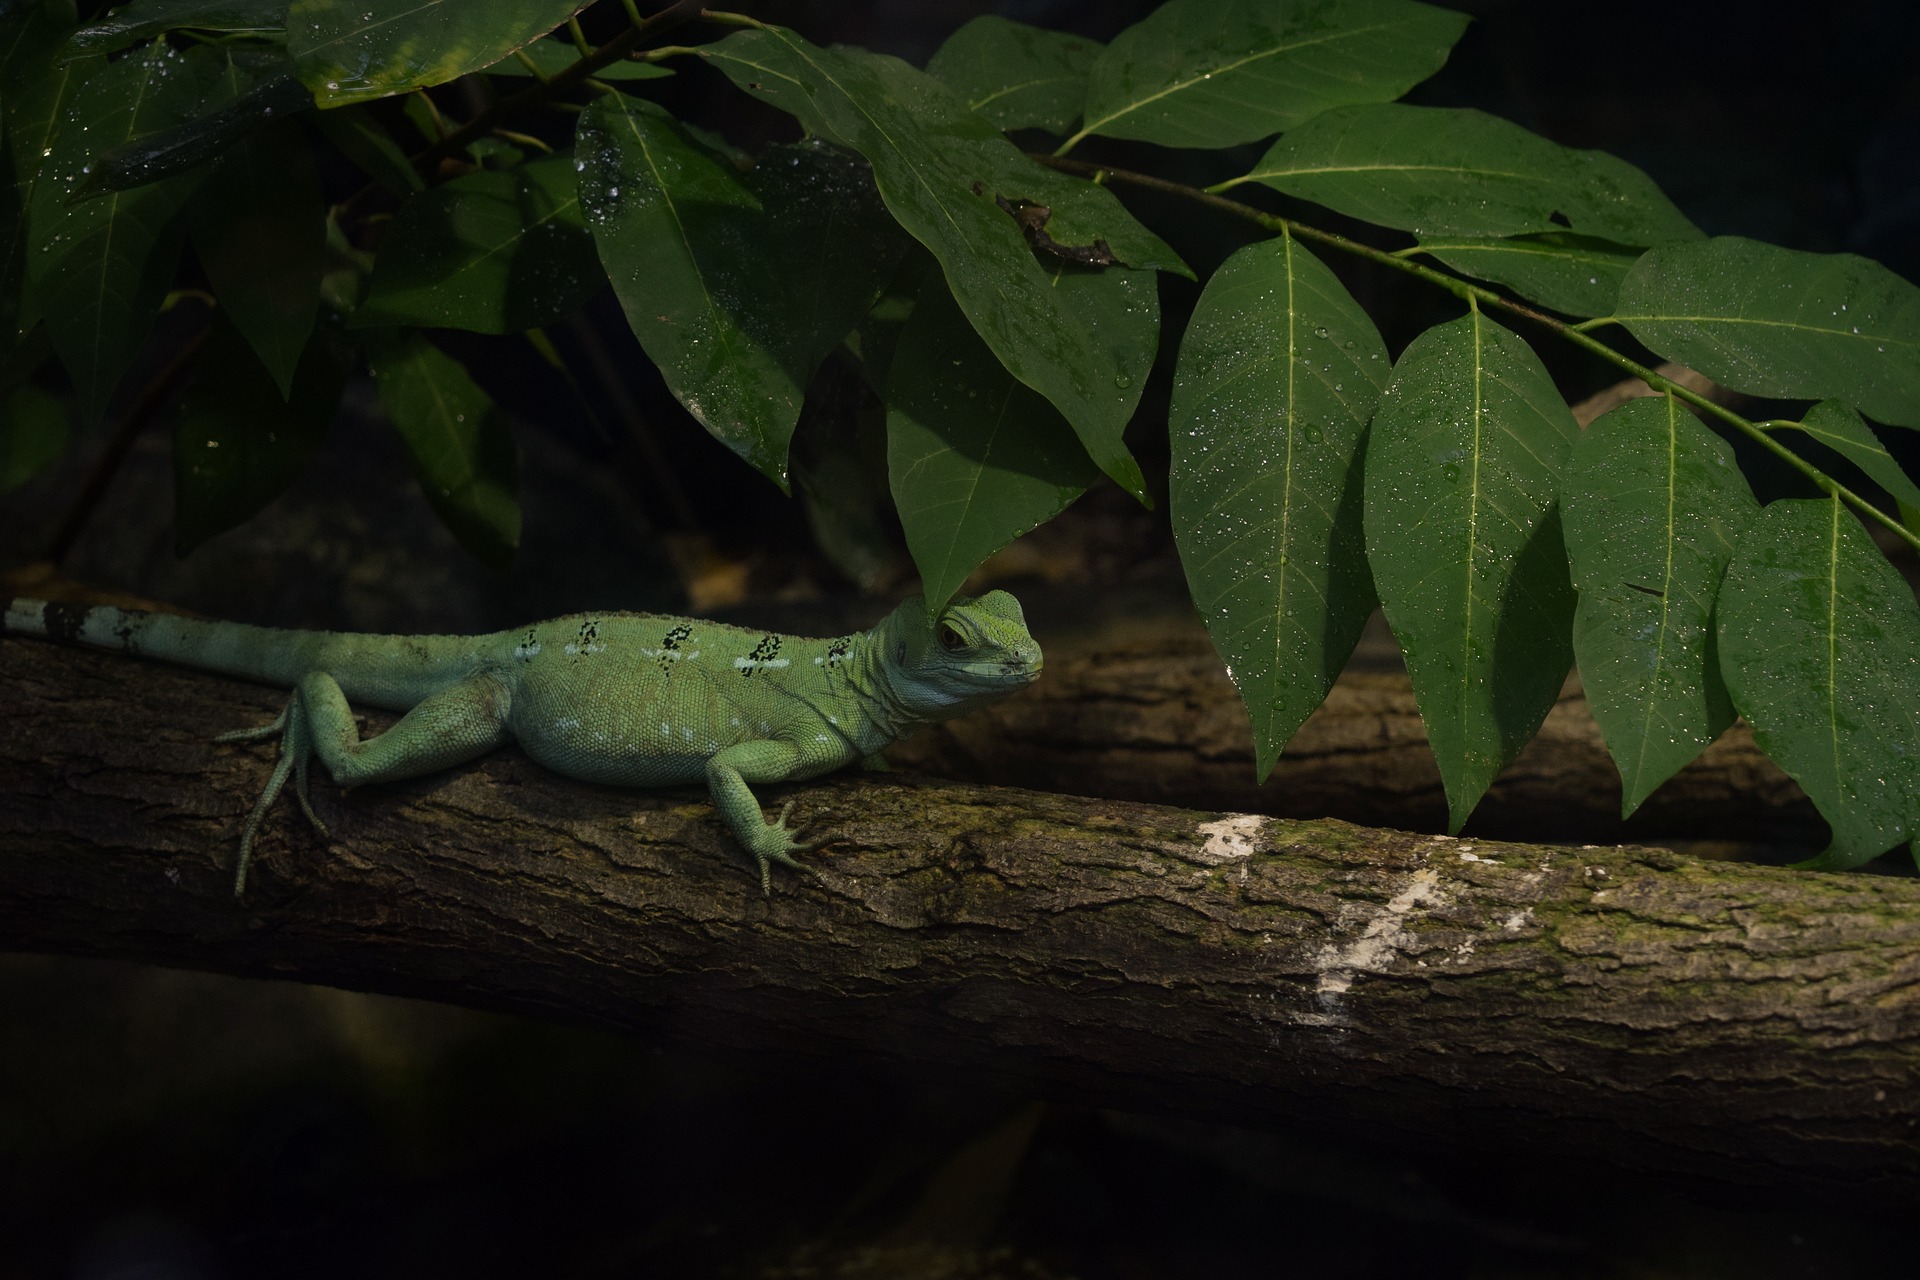 Lizard in the Rainforest by Jeremy Beckers